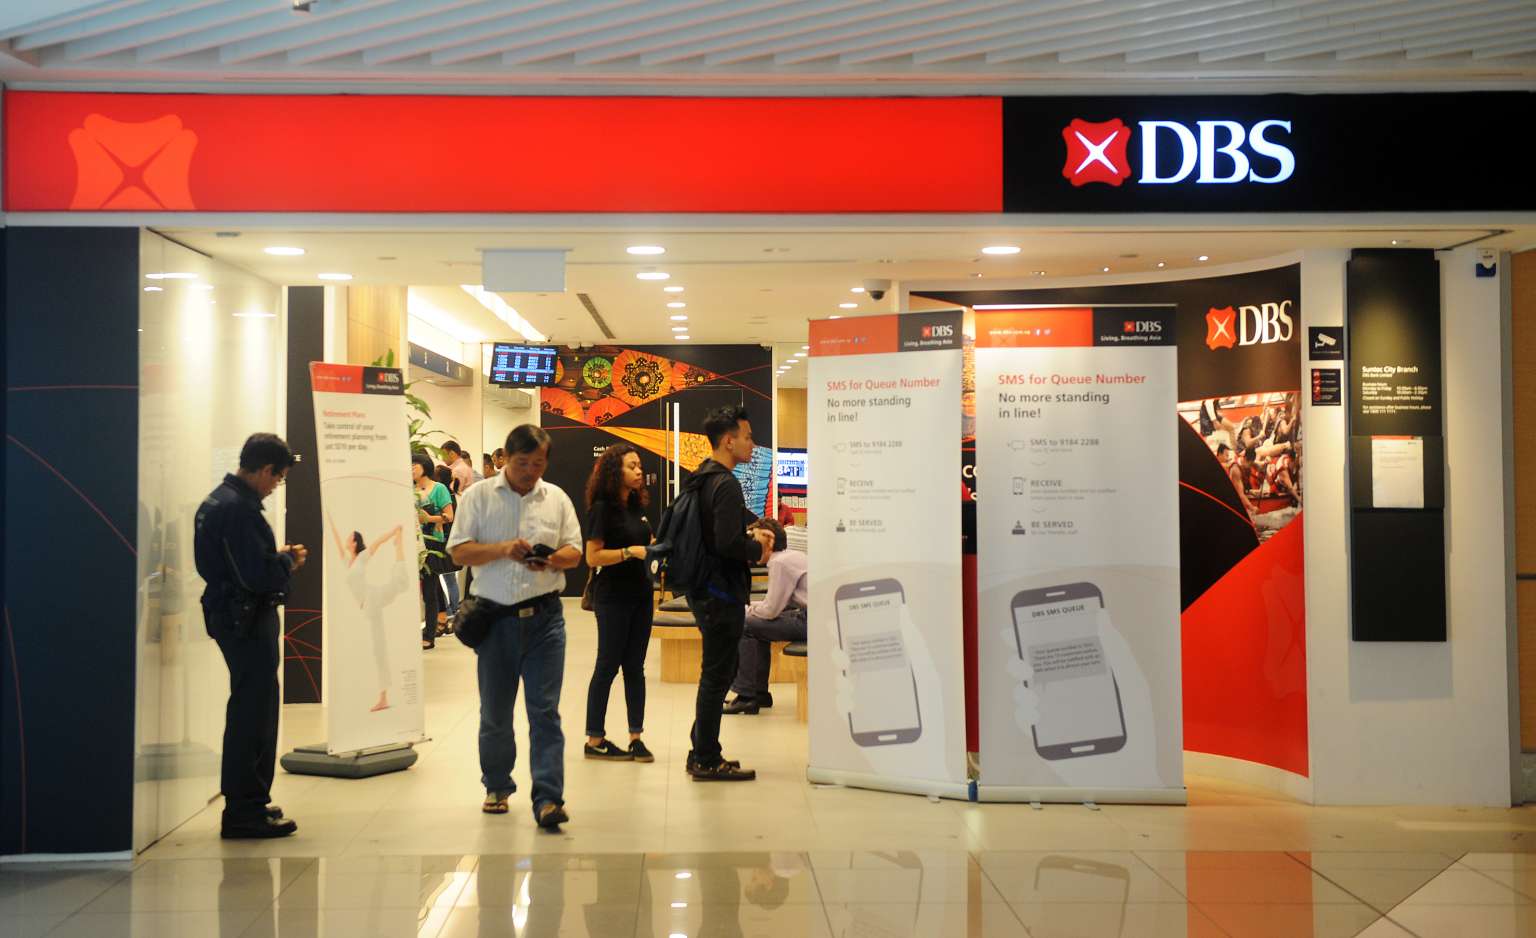 Very poor and questionable service from DBS Bank